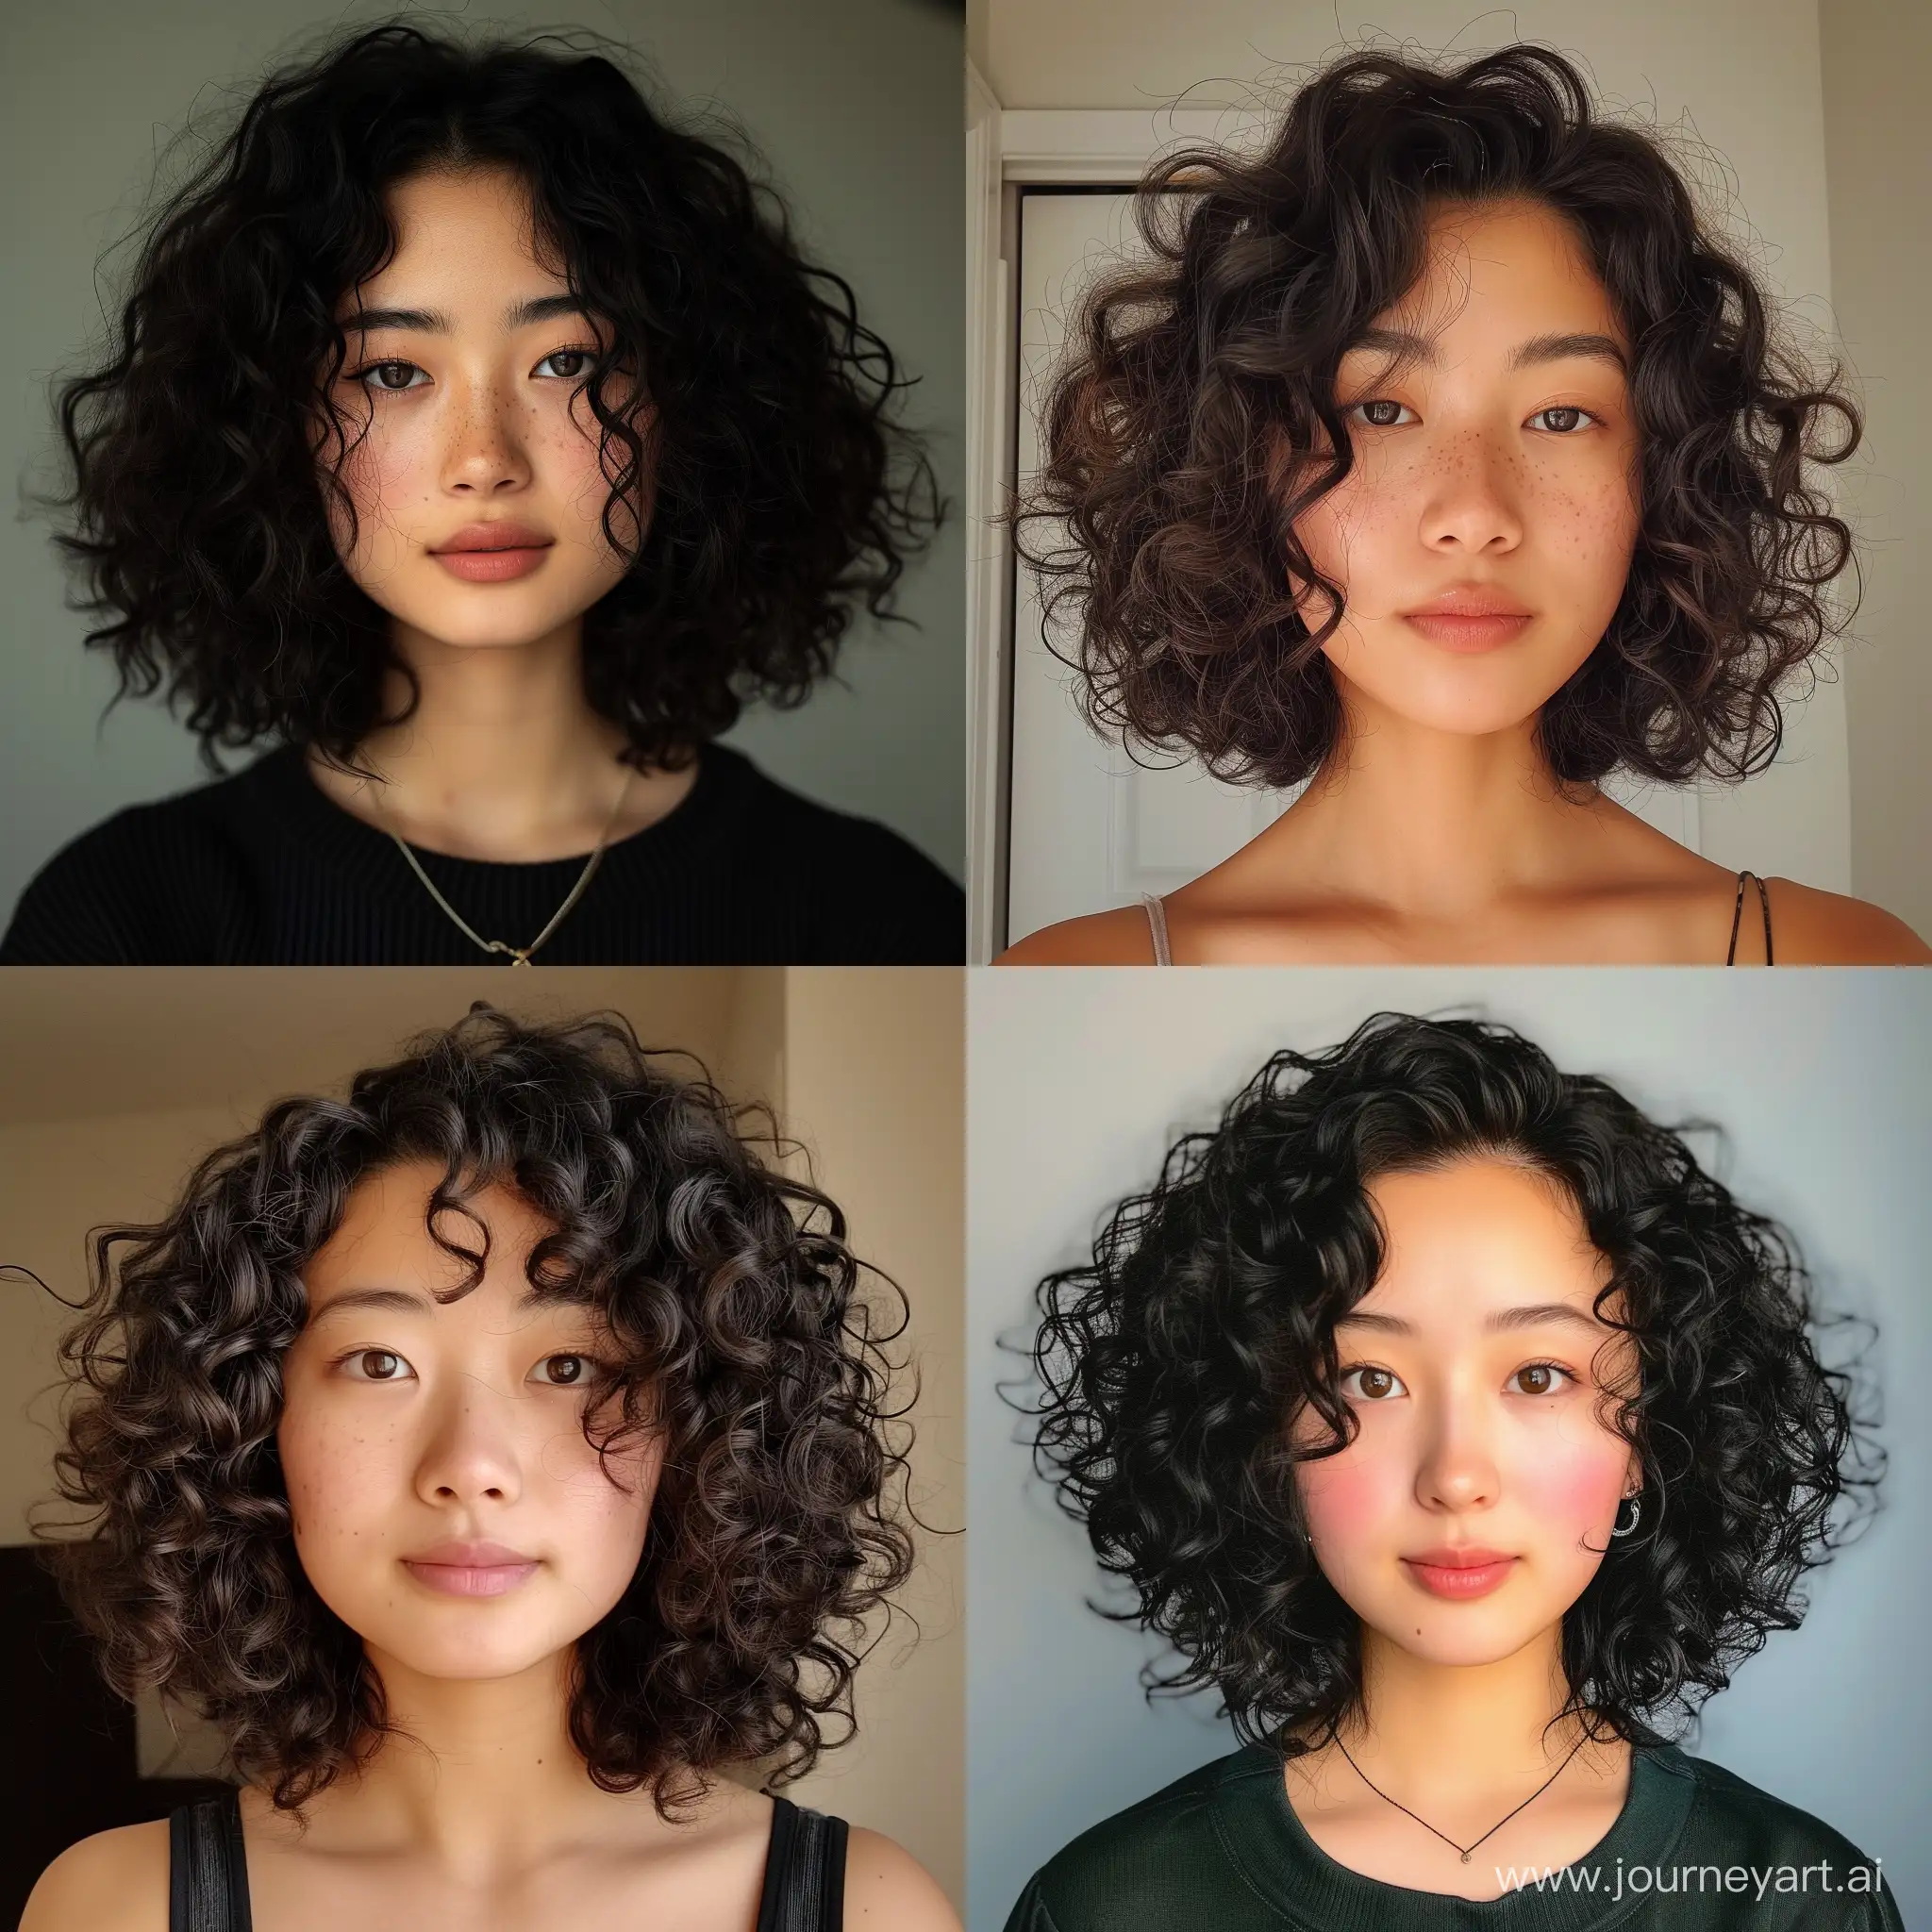 Charming-Asian-Girl-with-Curly-Hair-in-Vibrant-Vintage-Style-Portrait